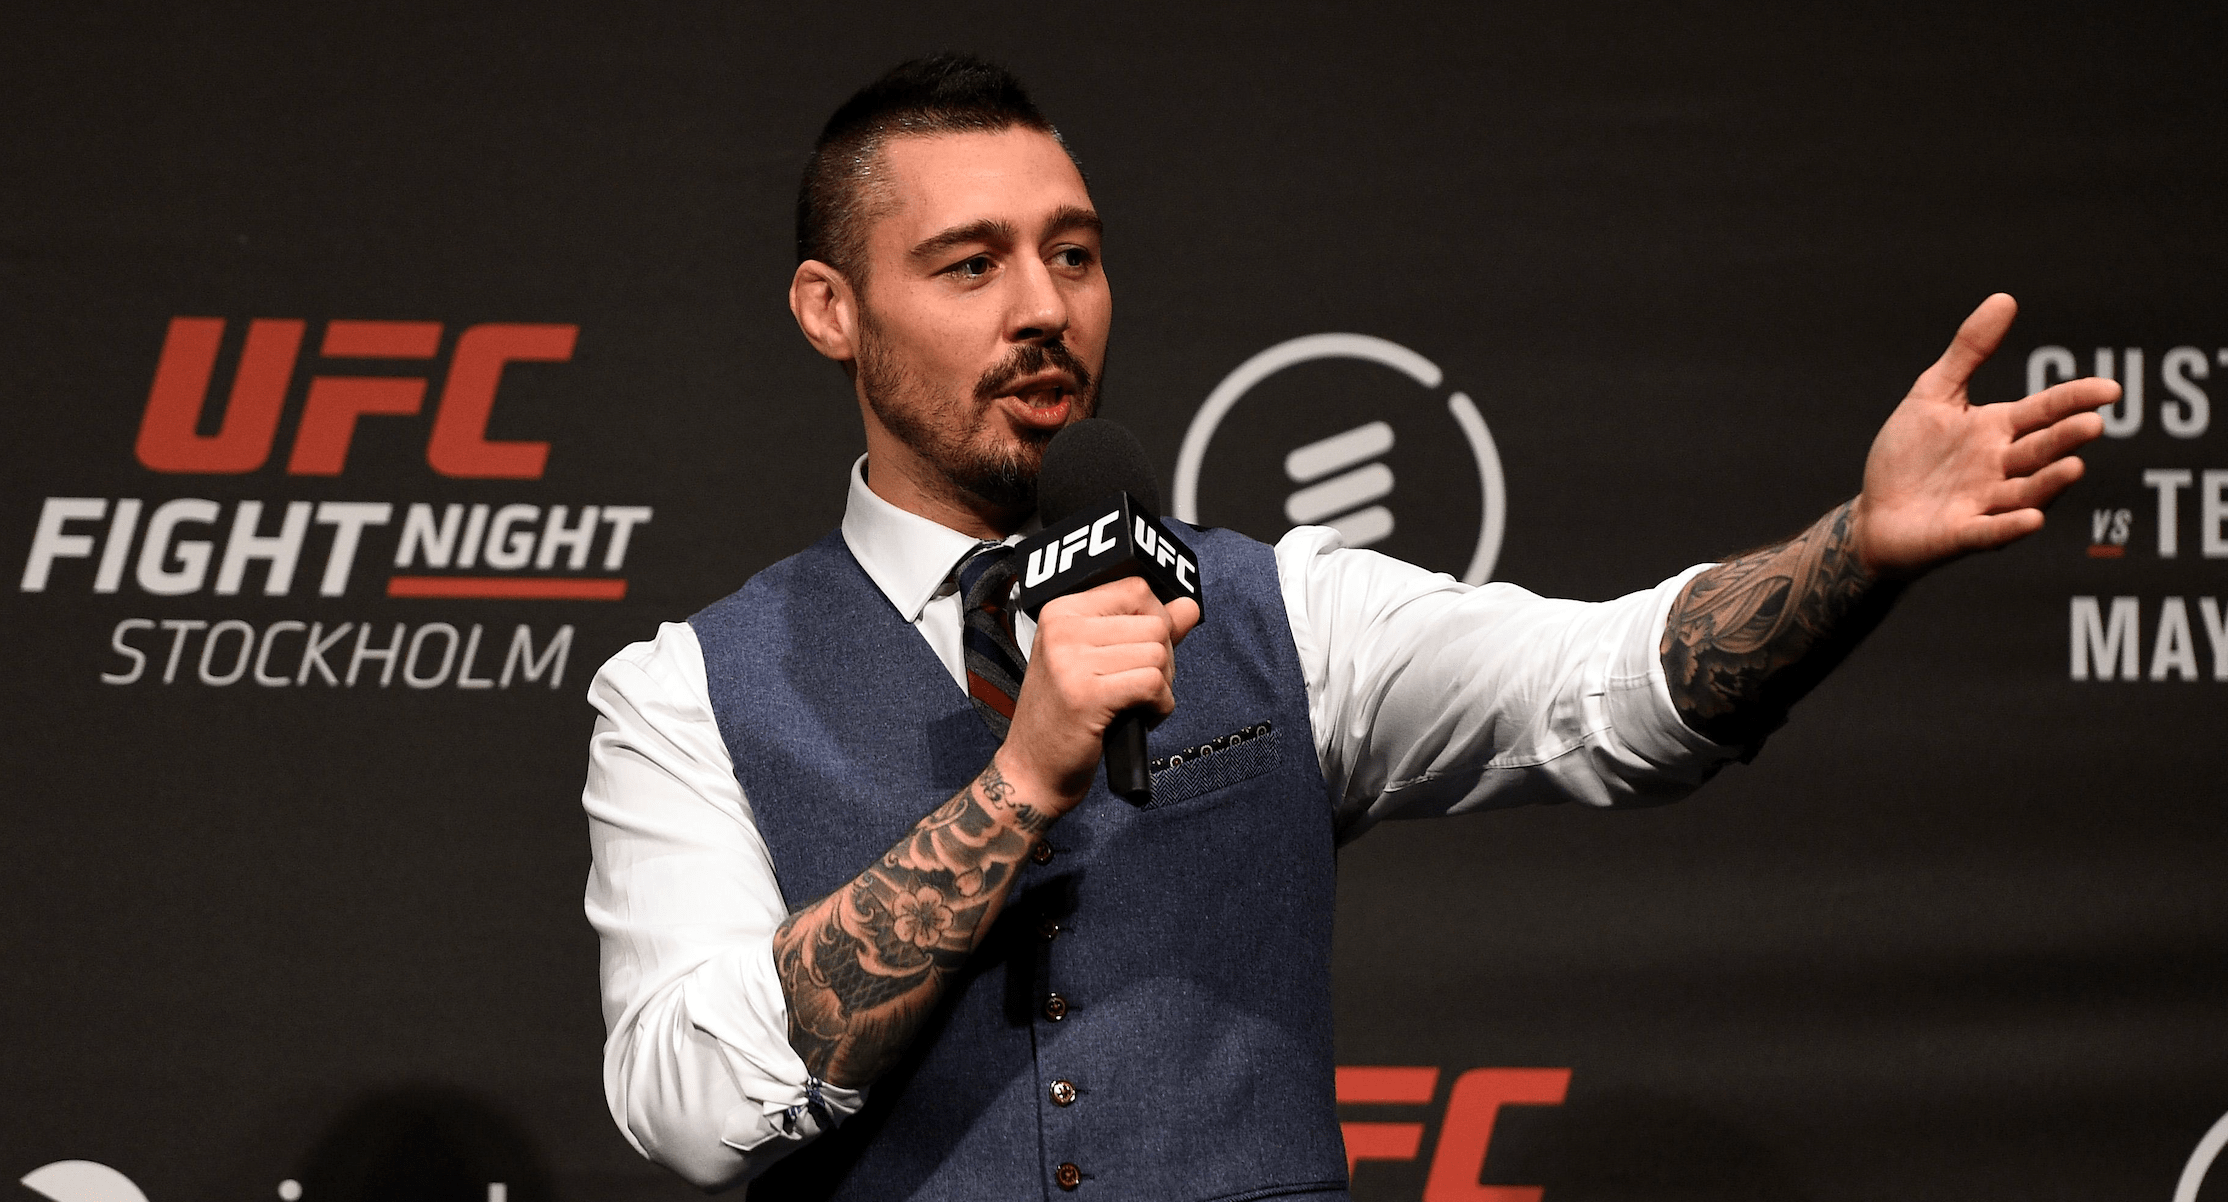 Dan Hardy Opens Up On Fall Out With UFC